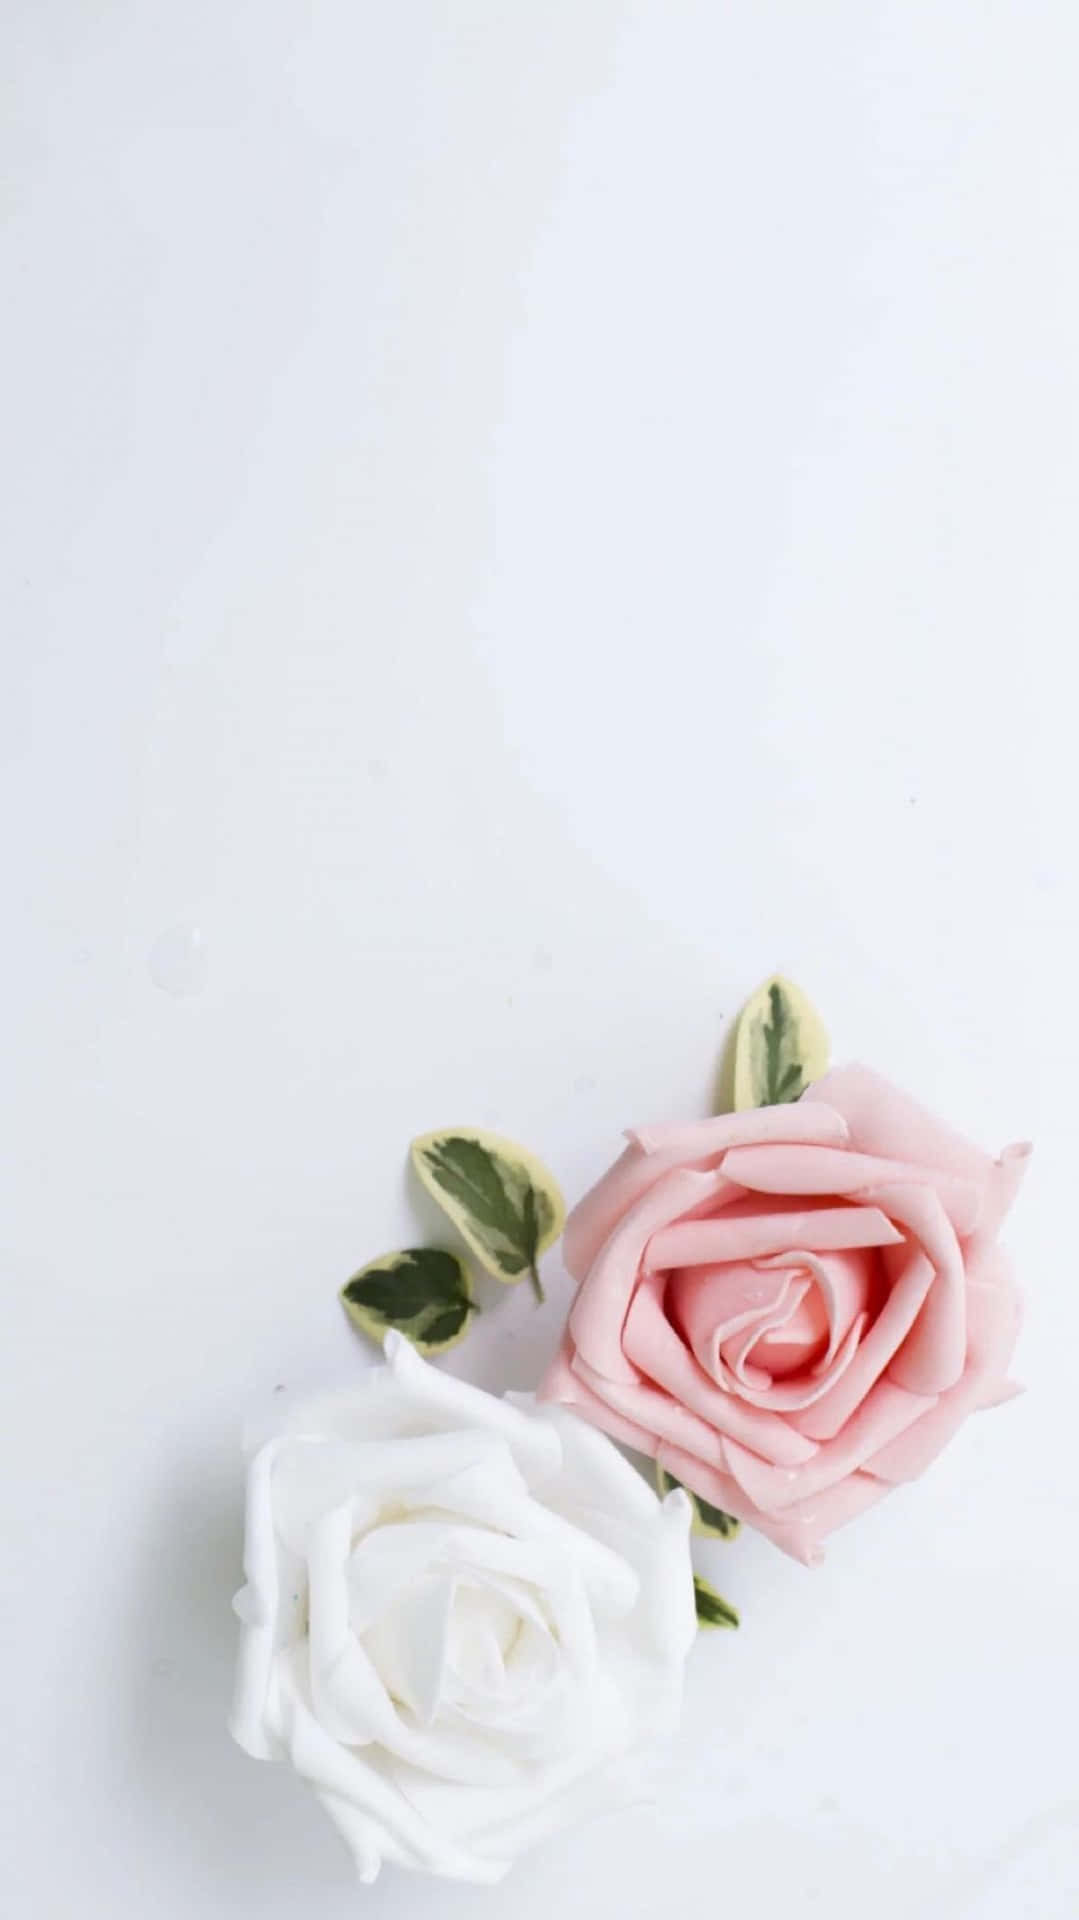 Two Pink And White Roses On A White Surface Wallpaper